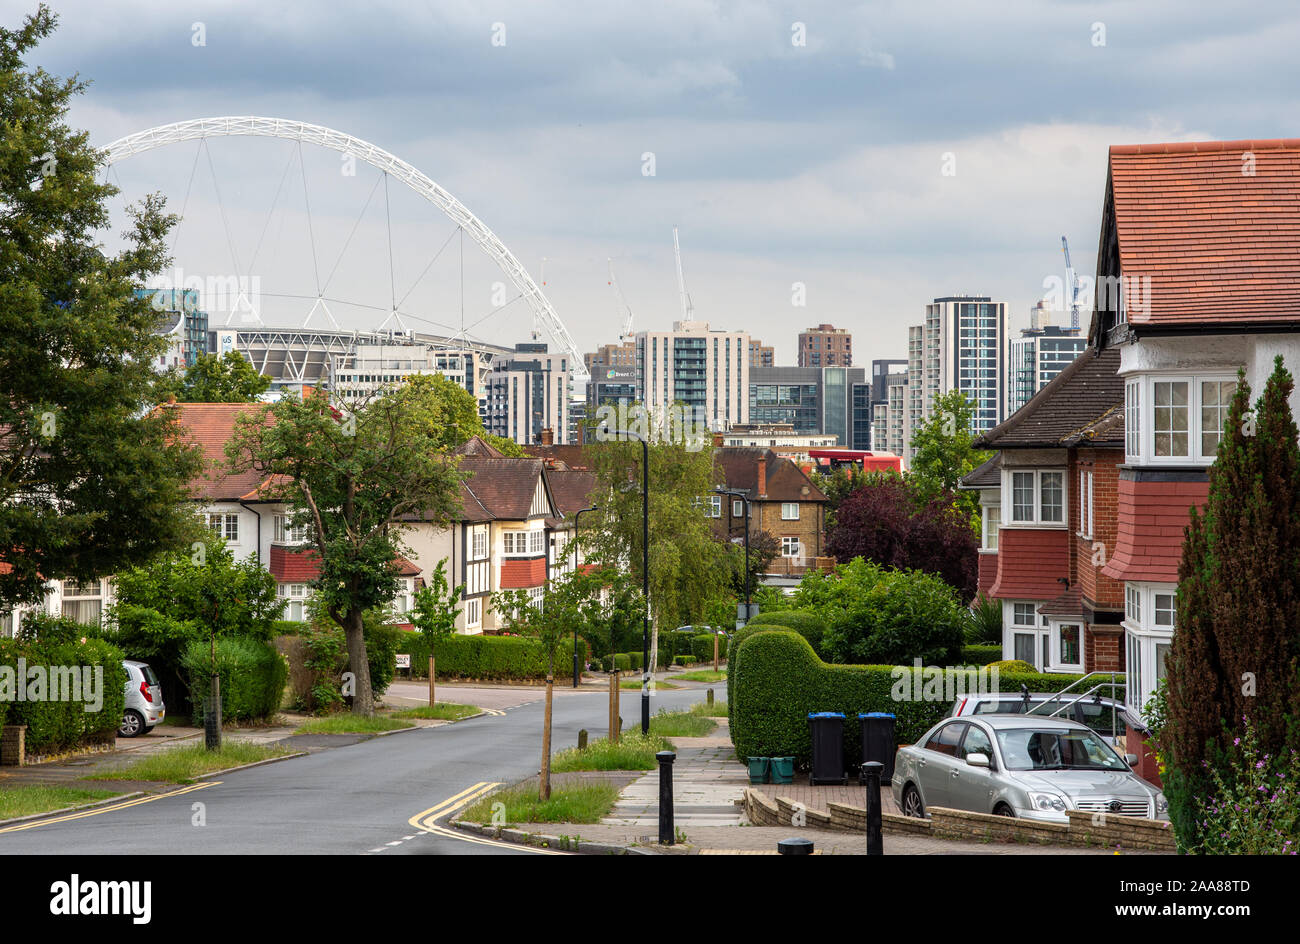 London, England, UK - July 7, 2019: The Wembley Stadium Arch and high rise new buildings appear over the suburban houses of Barn Hill in London. Stock Photo